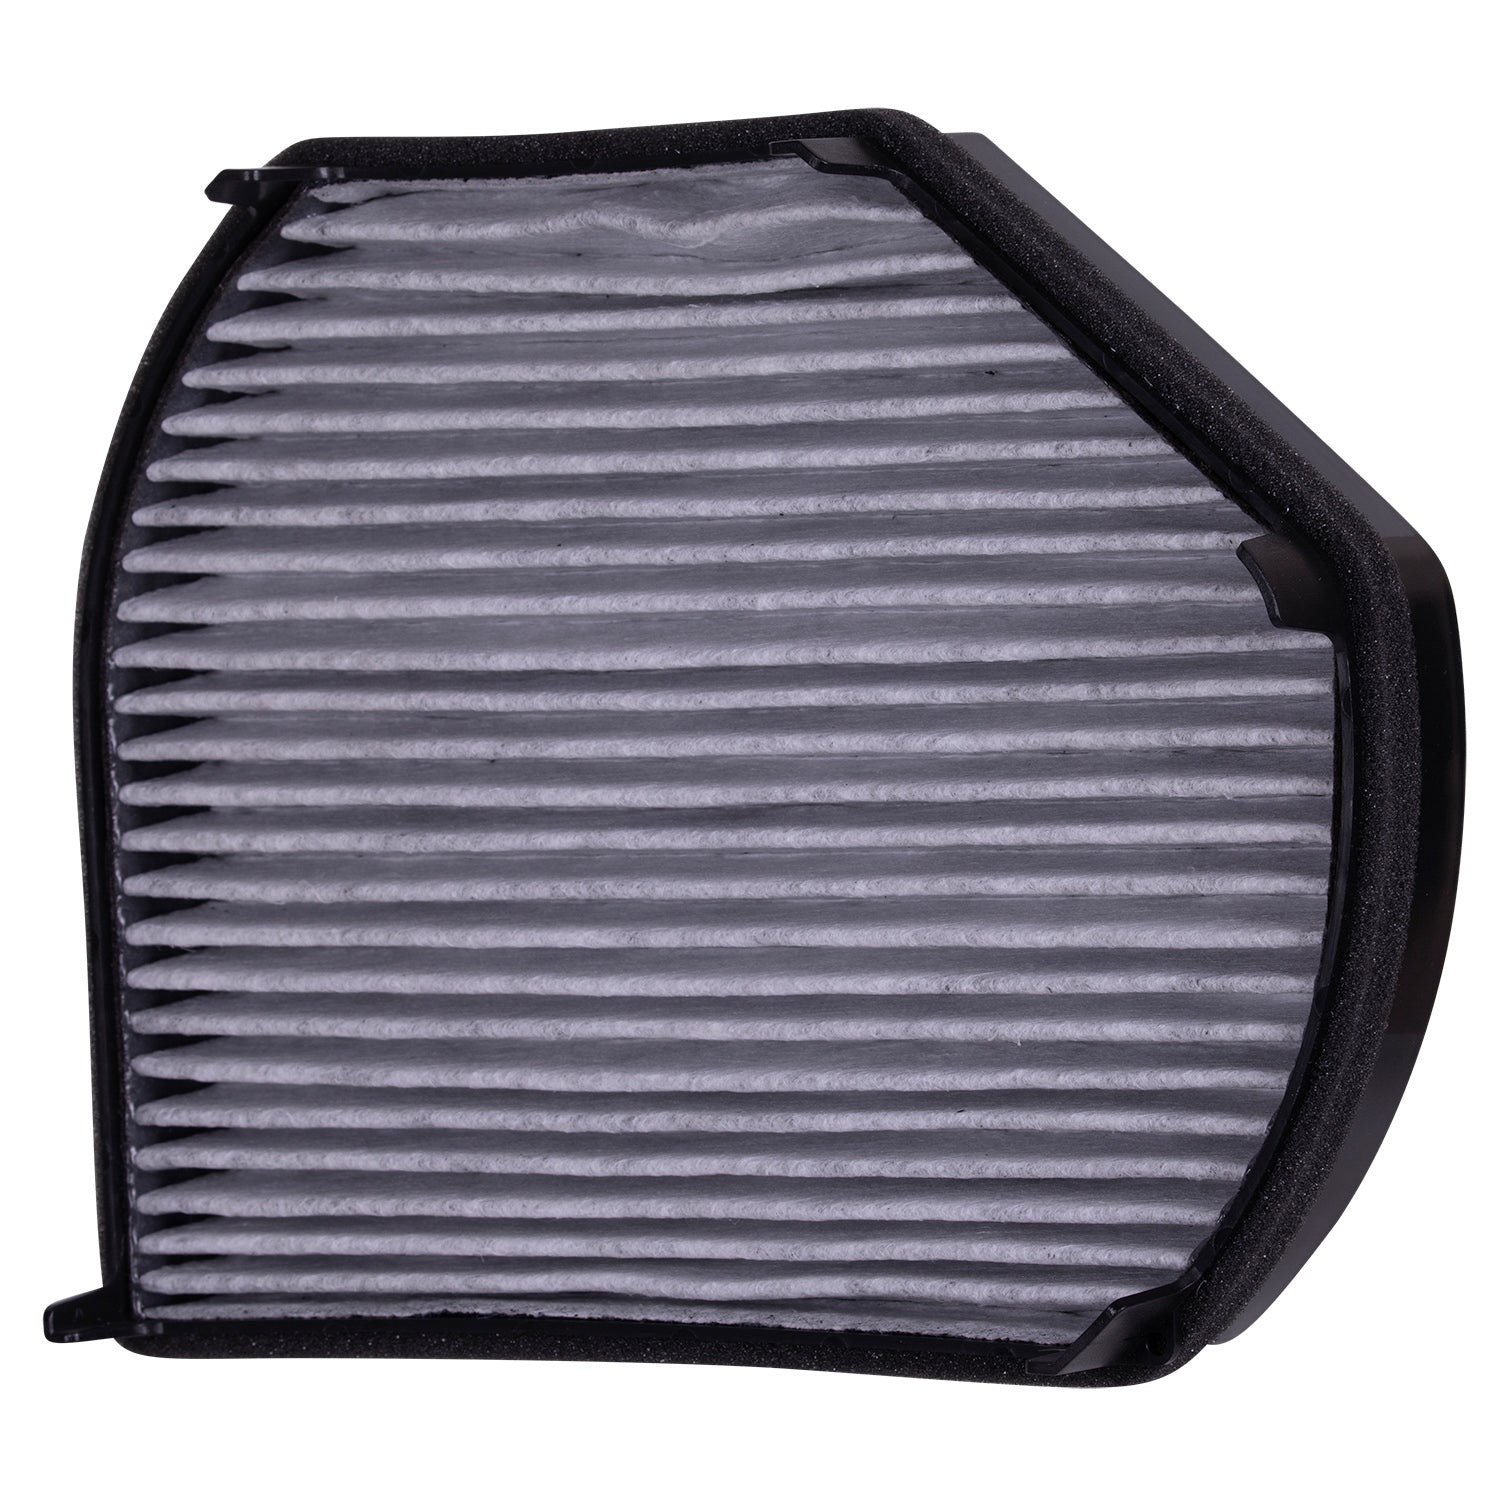 PUREFLOW 1997 Mercedes-Benz C280 Cabin Air Filter with Antibacterial Technology, PC8908X